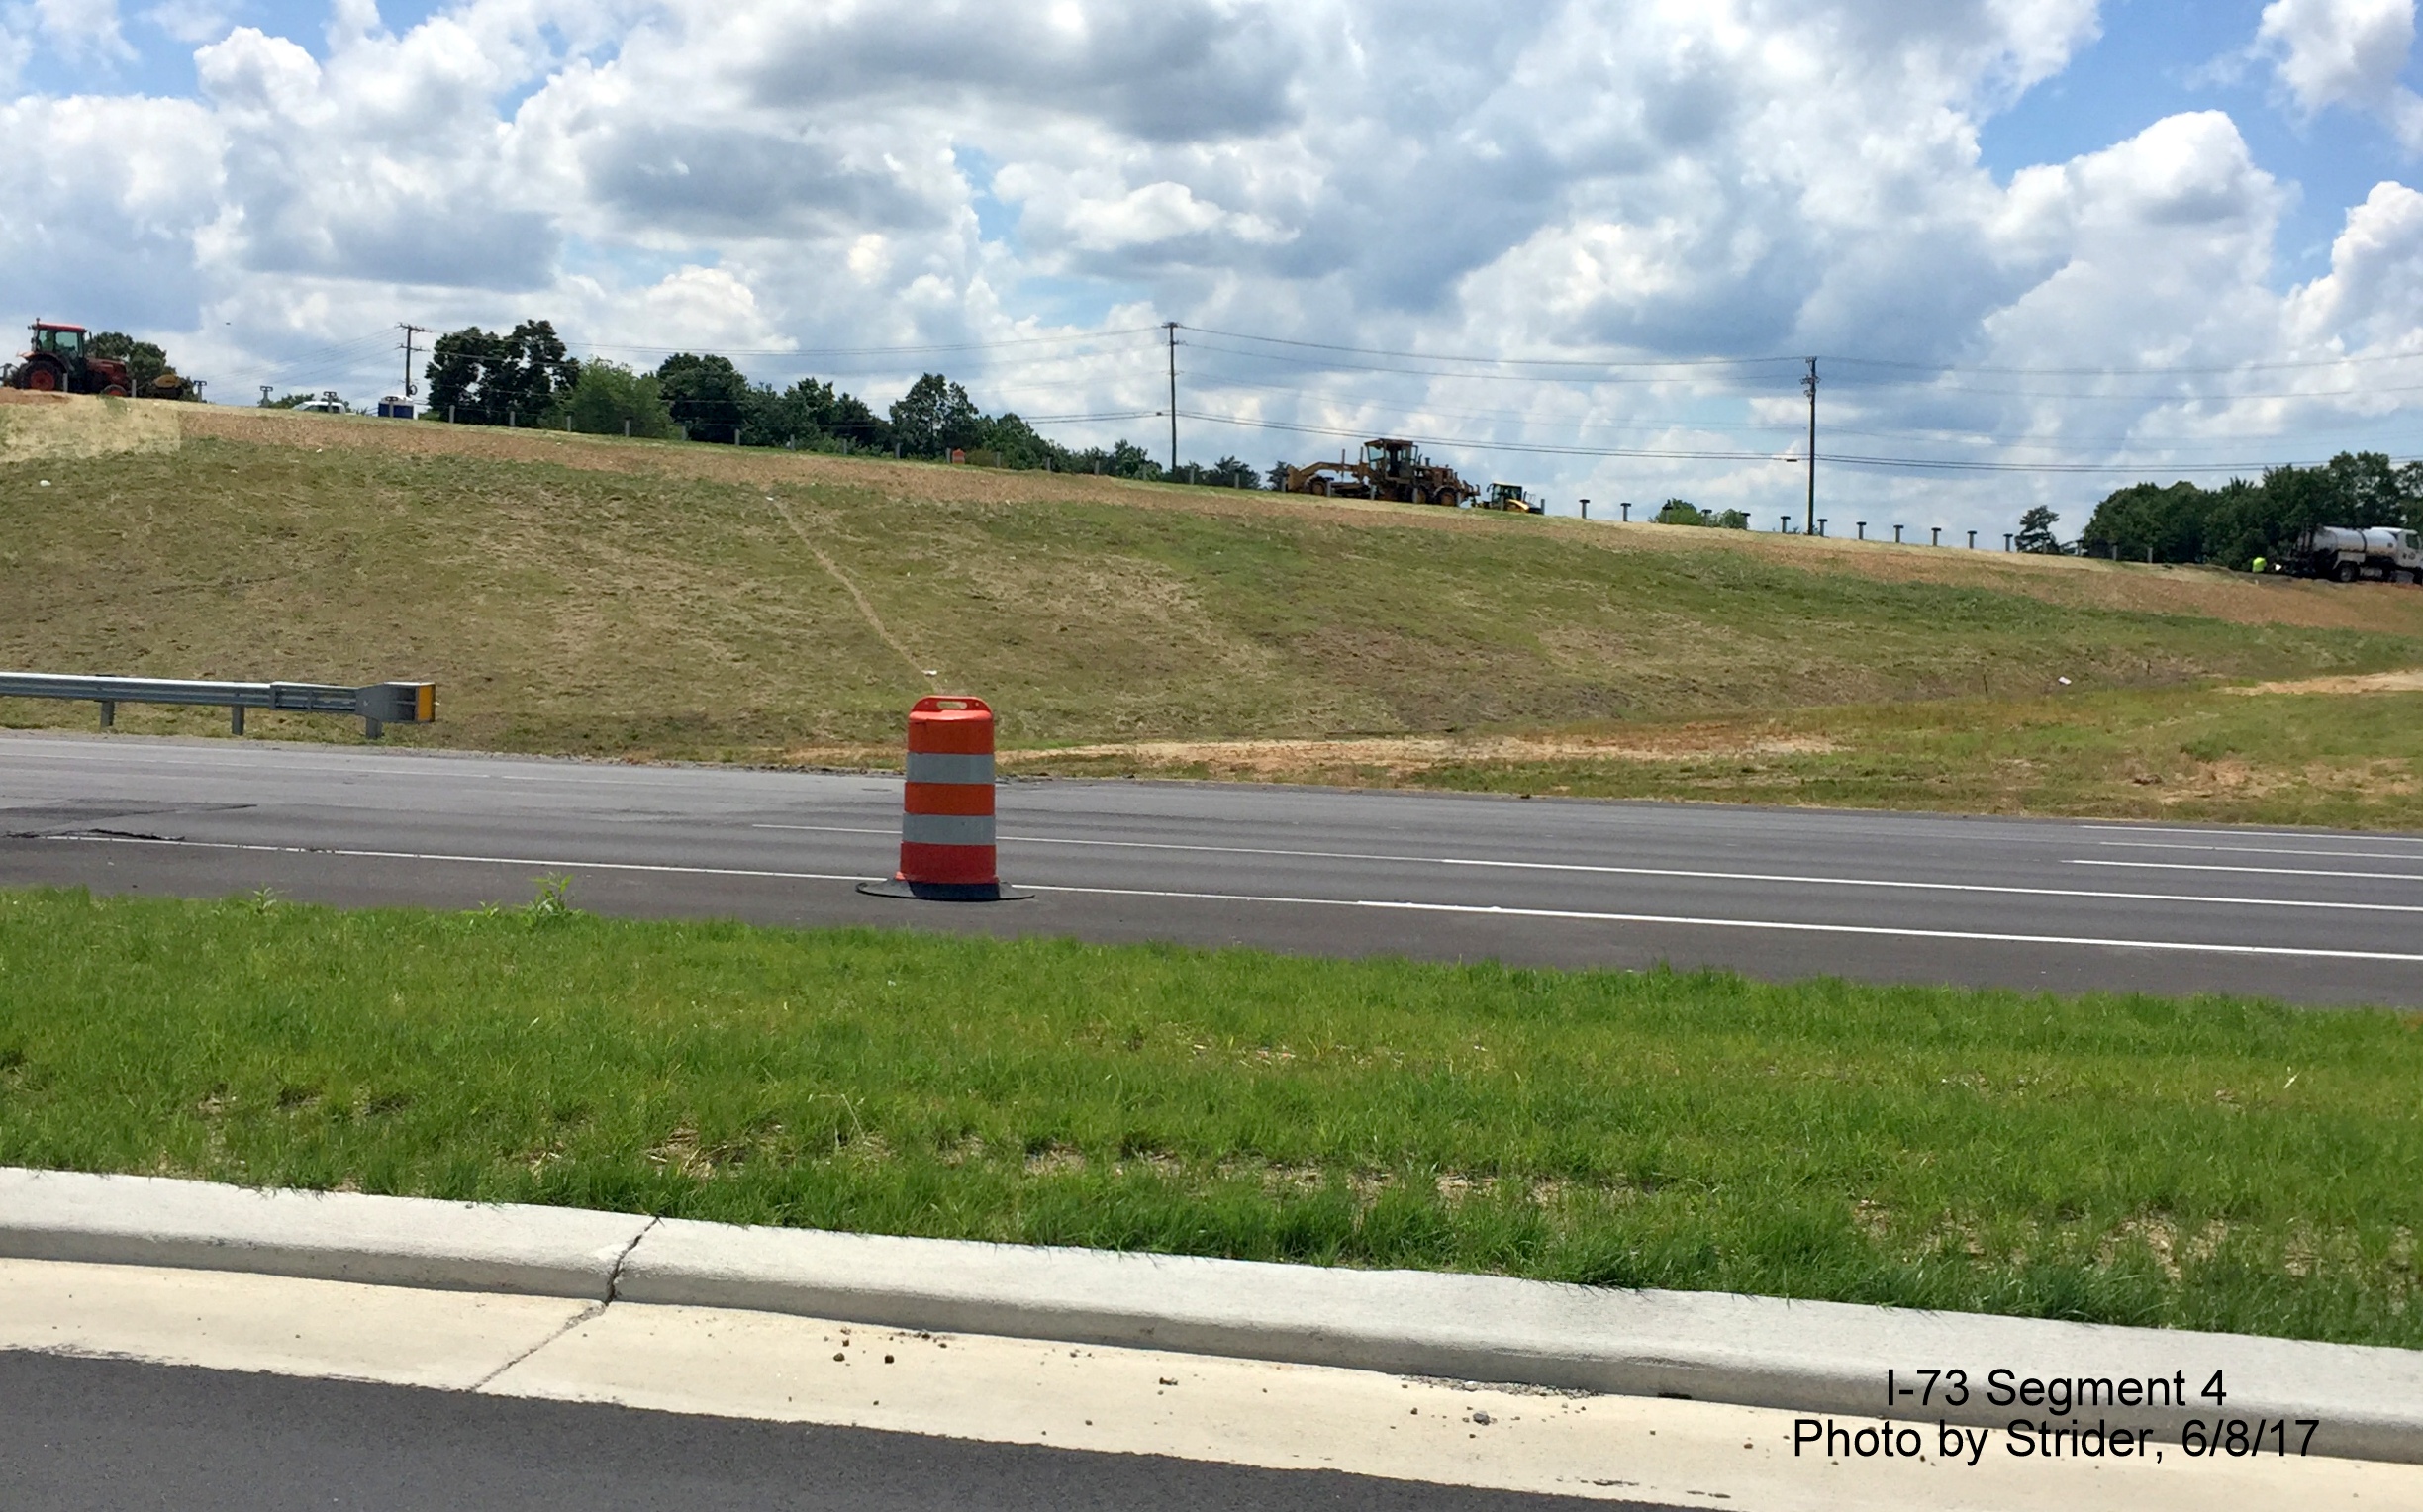 Image taken of view looking across NC 68 and Future I-73 roadway in Greensboro, by Strider